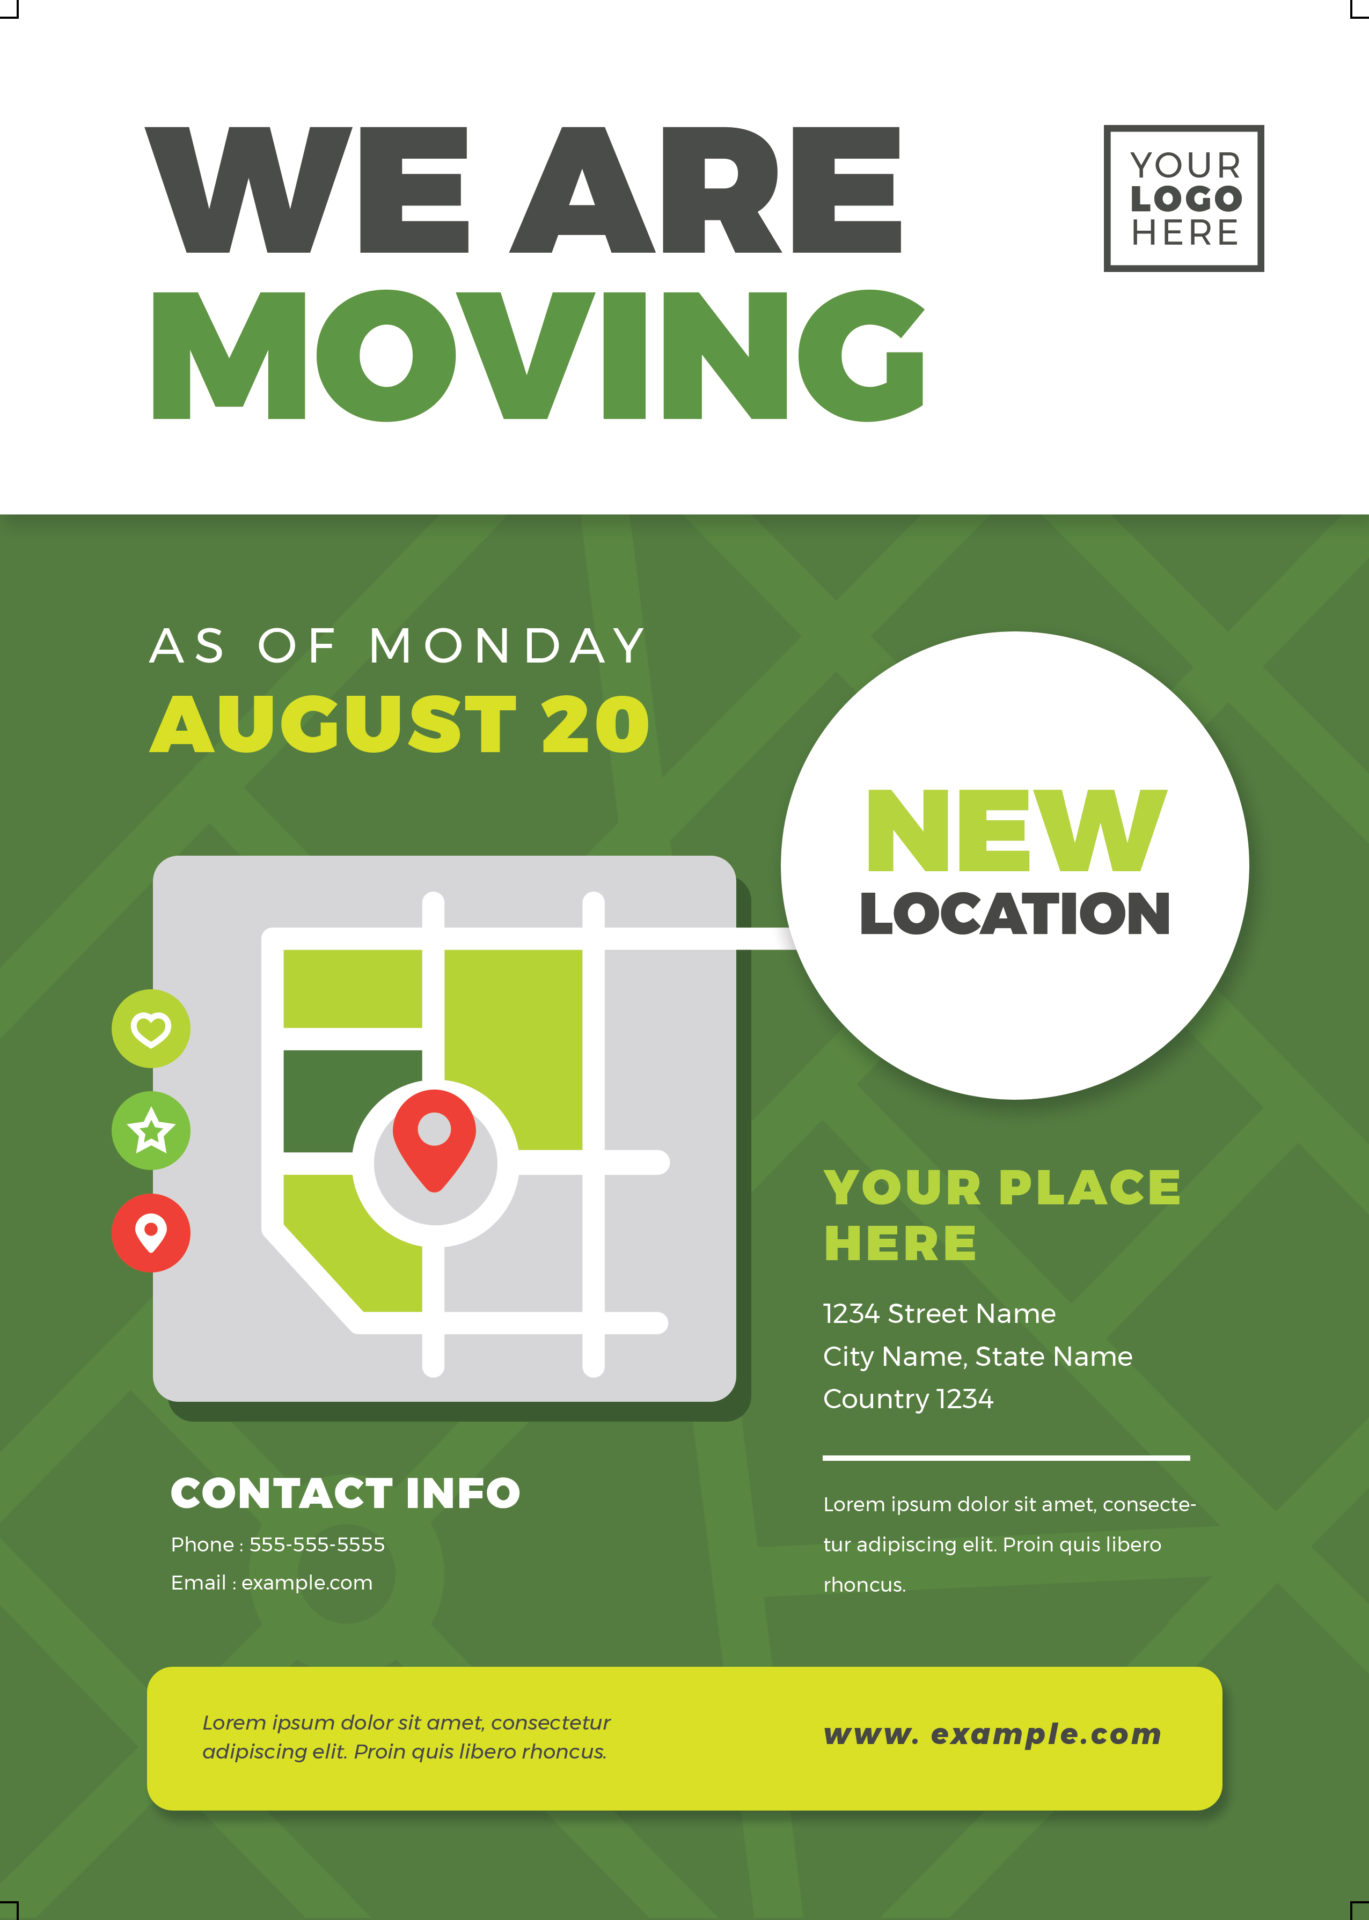 We-Are-Moving-Flyer-Templates-3